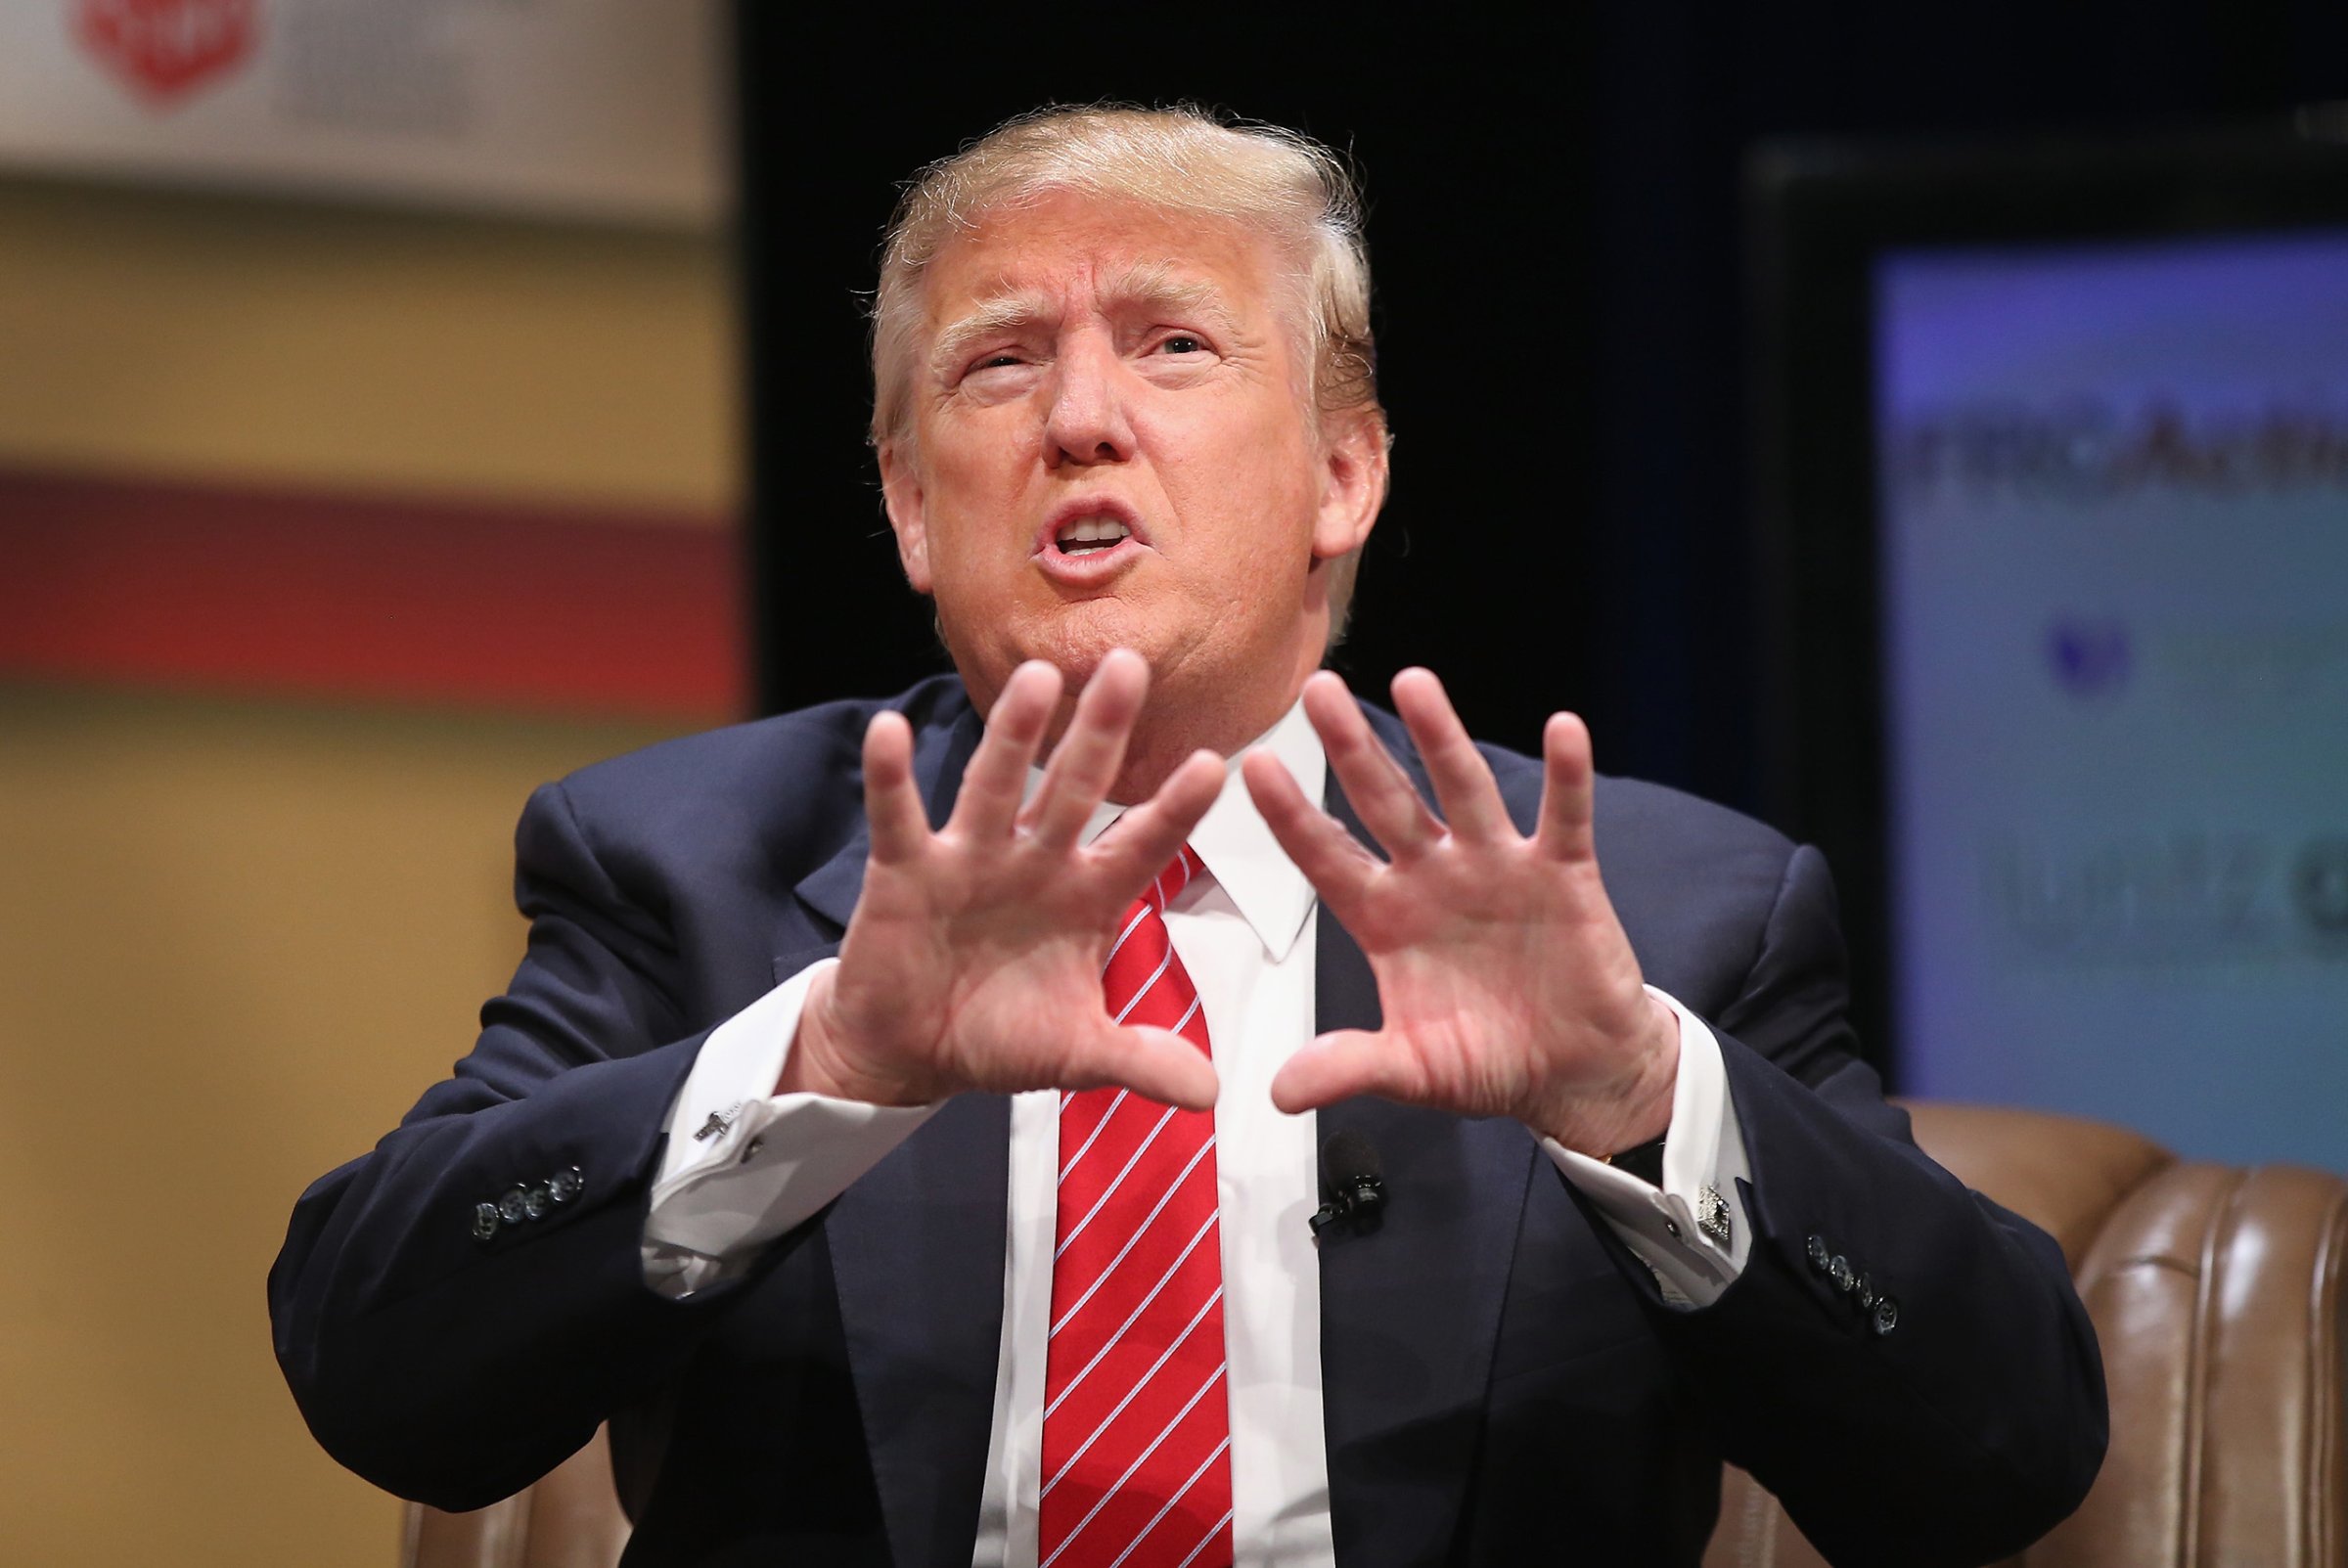 Donald Trump fields questions at The Family Leadership Summit in Ames, Iowa on July 18, 2015.